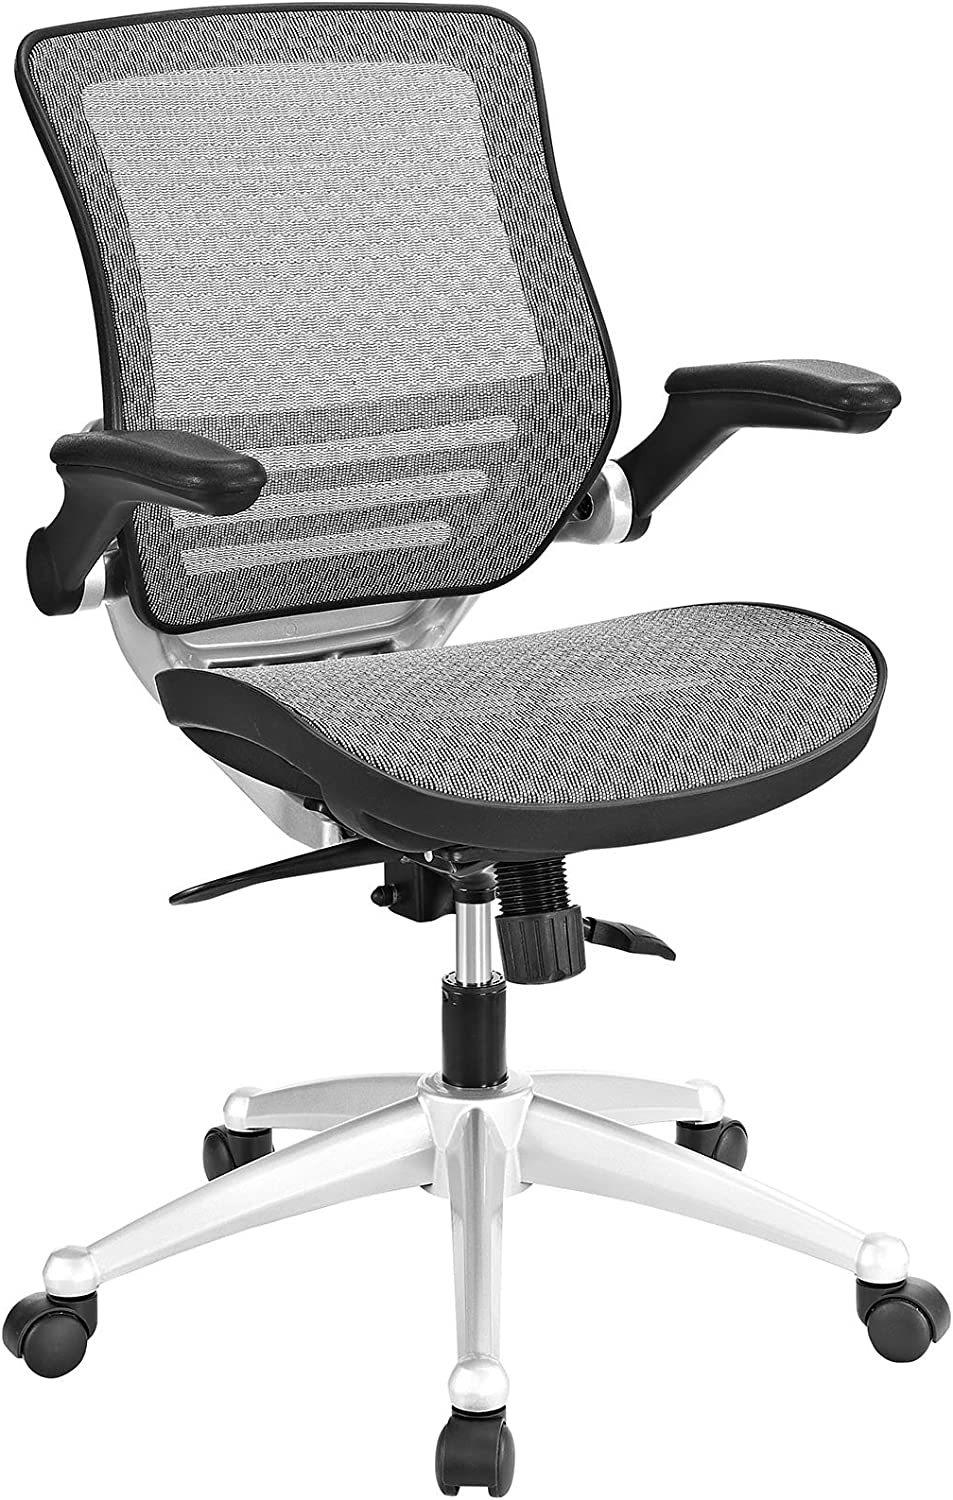 Modway Edge All Mesh Office Chair In Gray With Flip-Up Arms - Perfect For Computer Desks